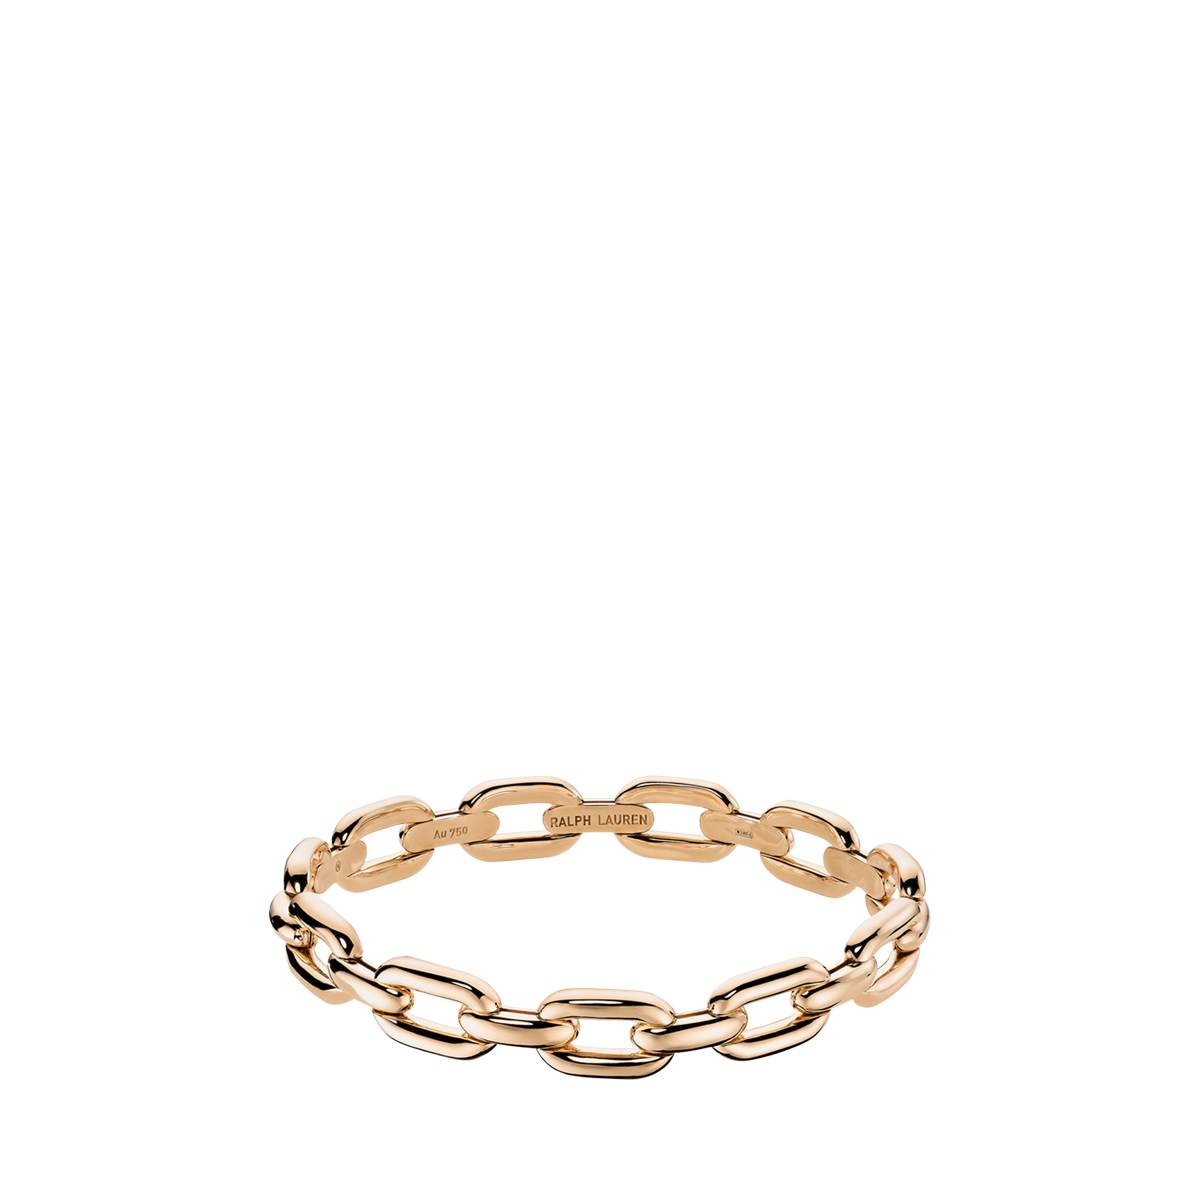 Buy online Gold Leather Bracelet from Accessories for Men by Nm